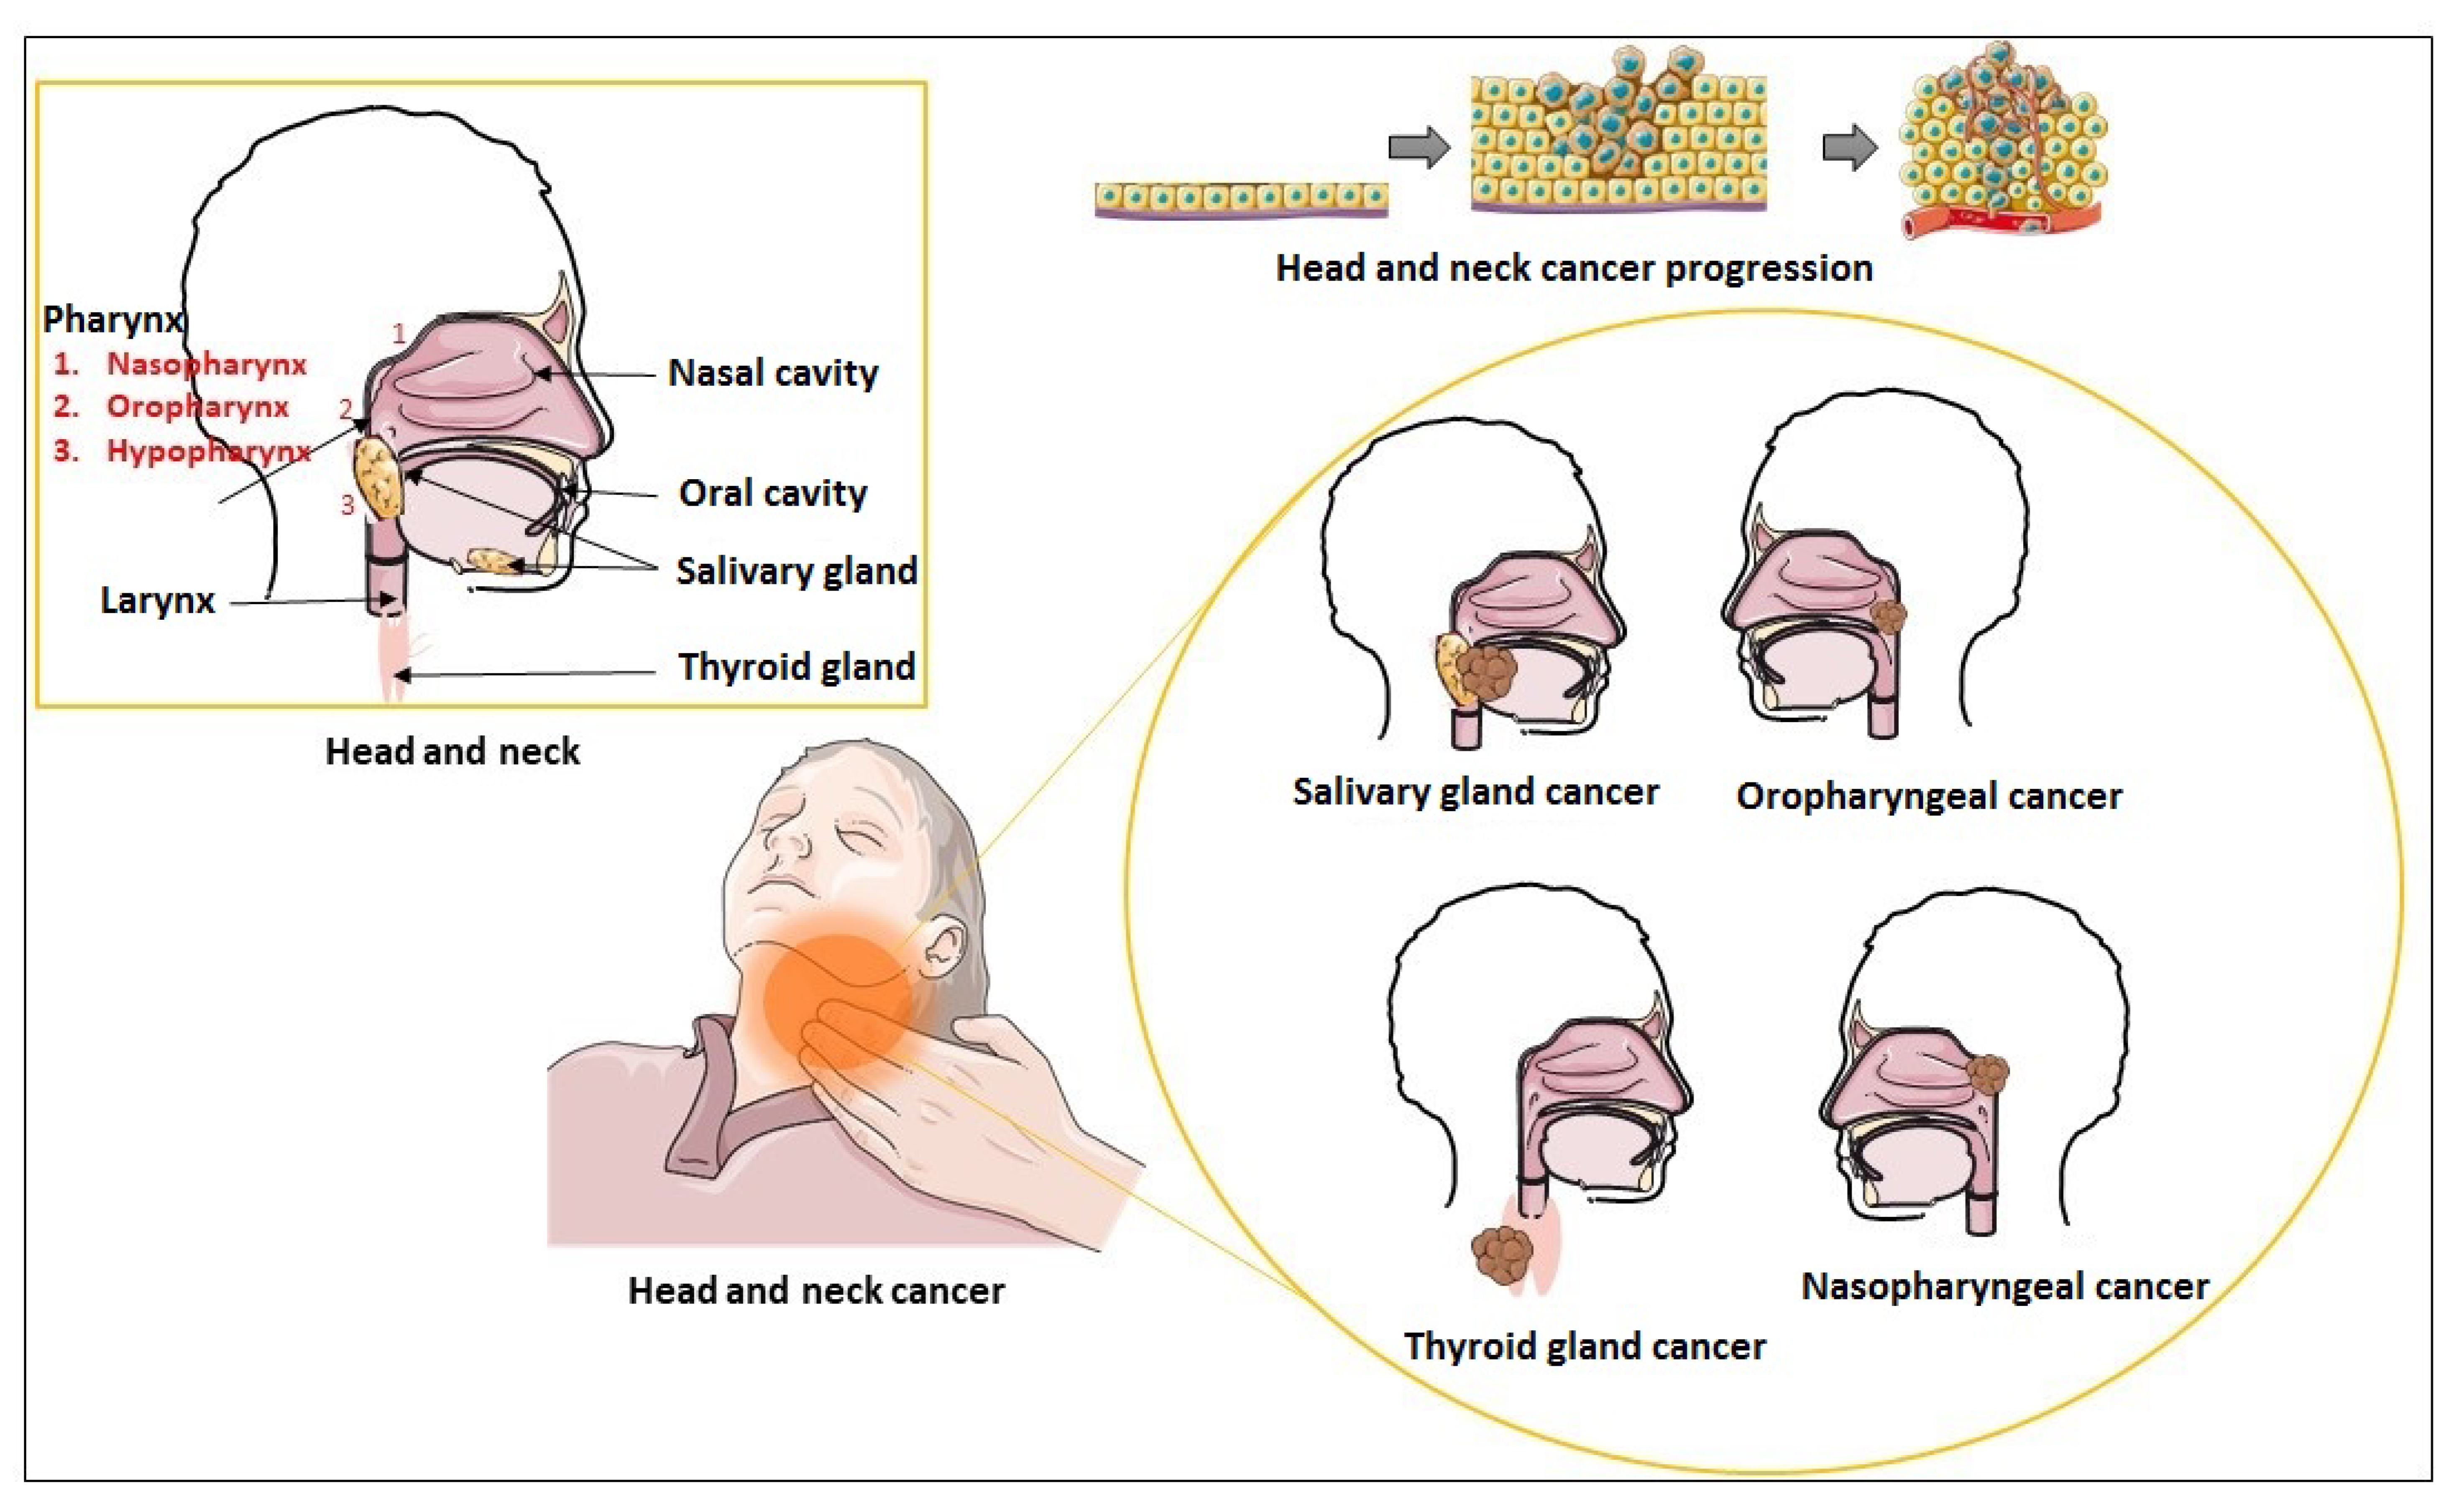 Figure 1 Schematic representation of head and neck region and types of head and neck carcinoma. (Mastronikolis, 2023)